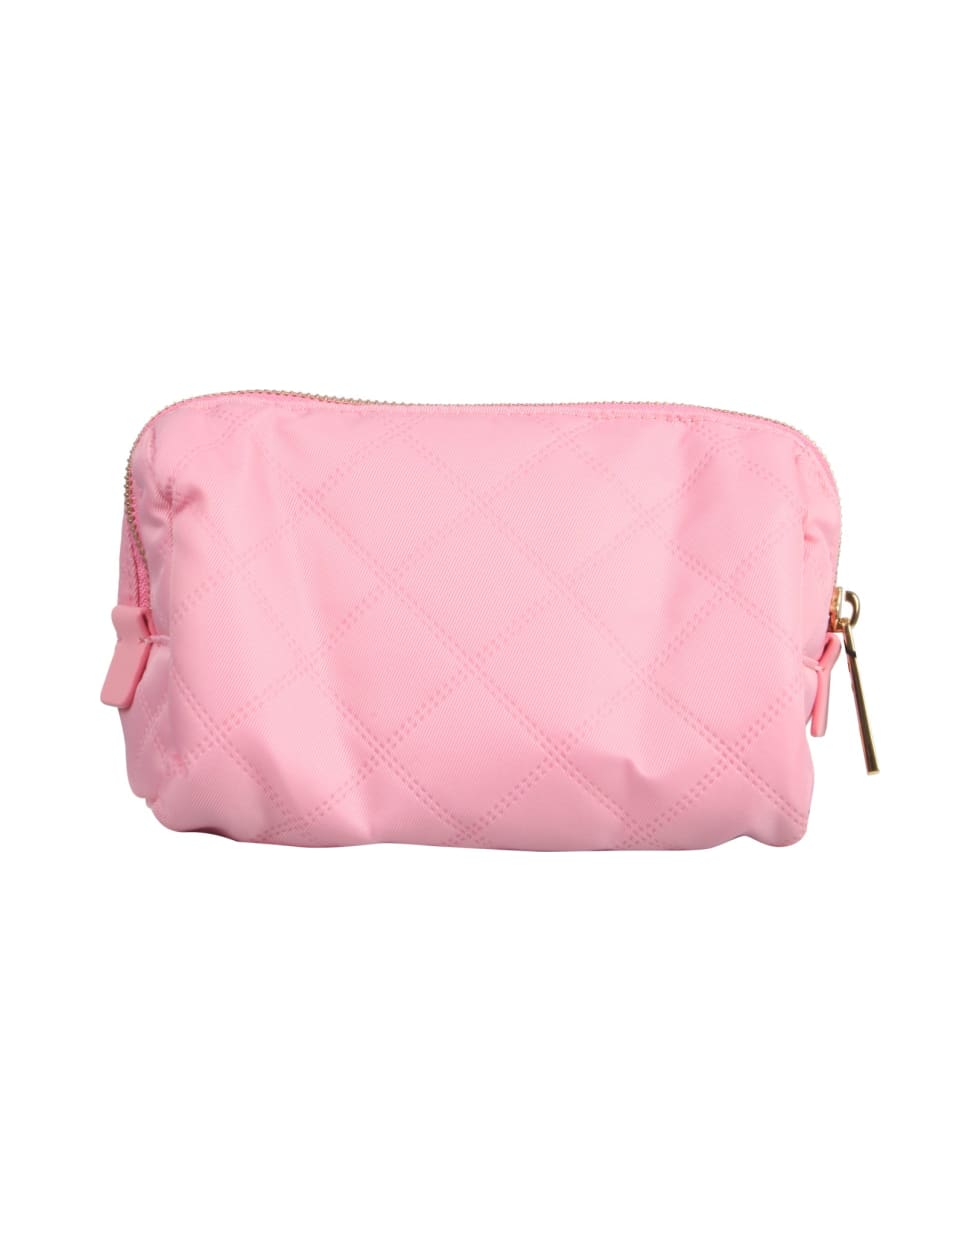 Marc Jacobs The Beauty Triangle Pouch - ROSA